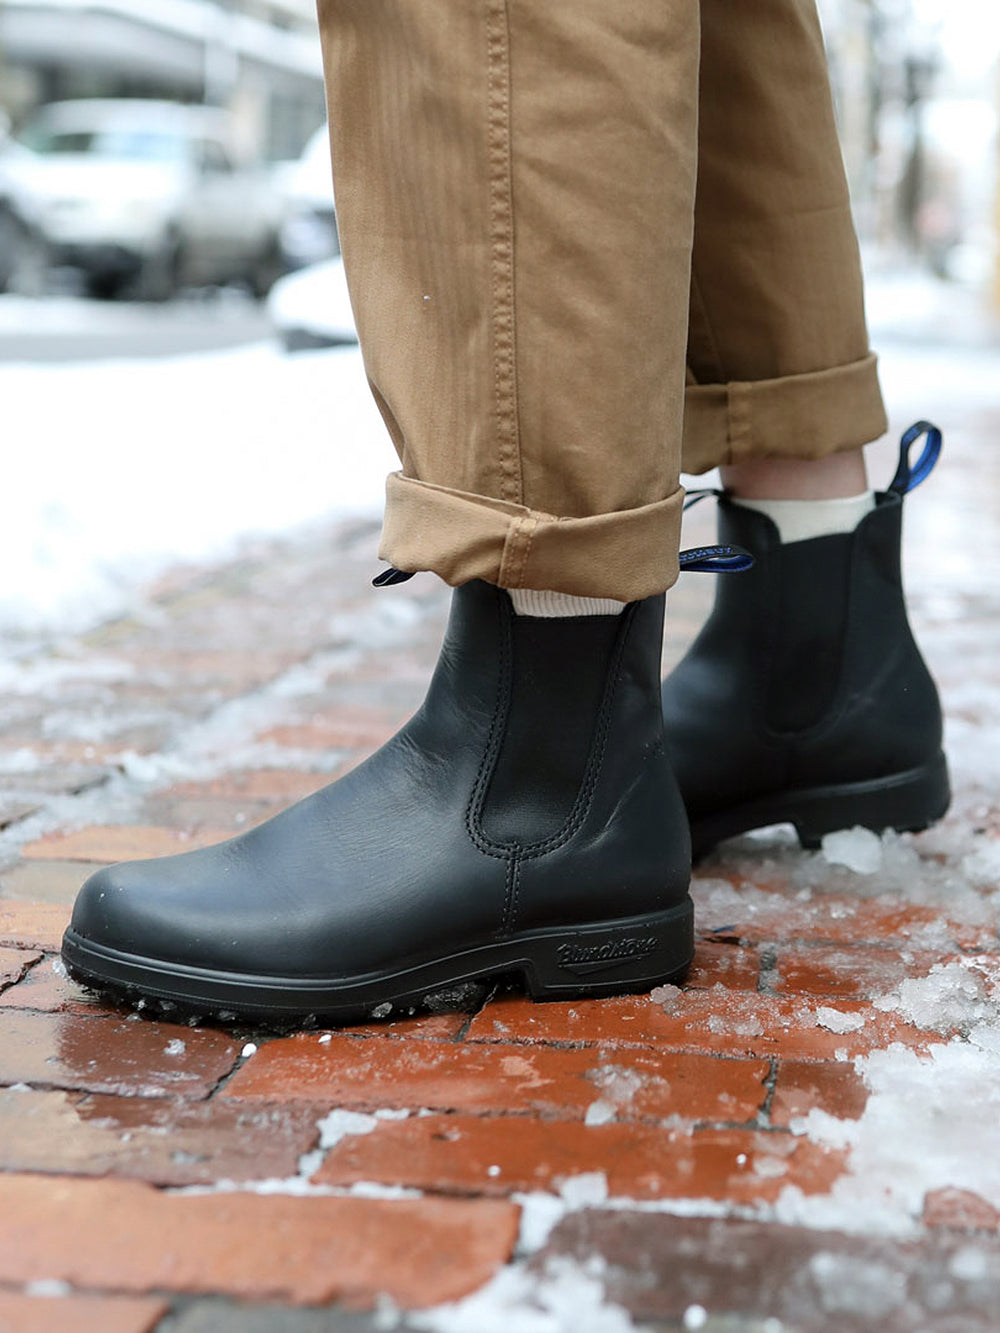 WOMENS BLUNDSTONE WINTER THERMAL CLASSIC BLACK BOOT